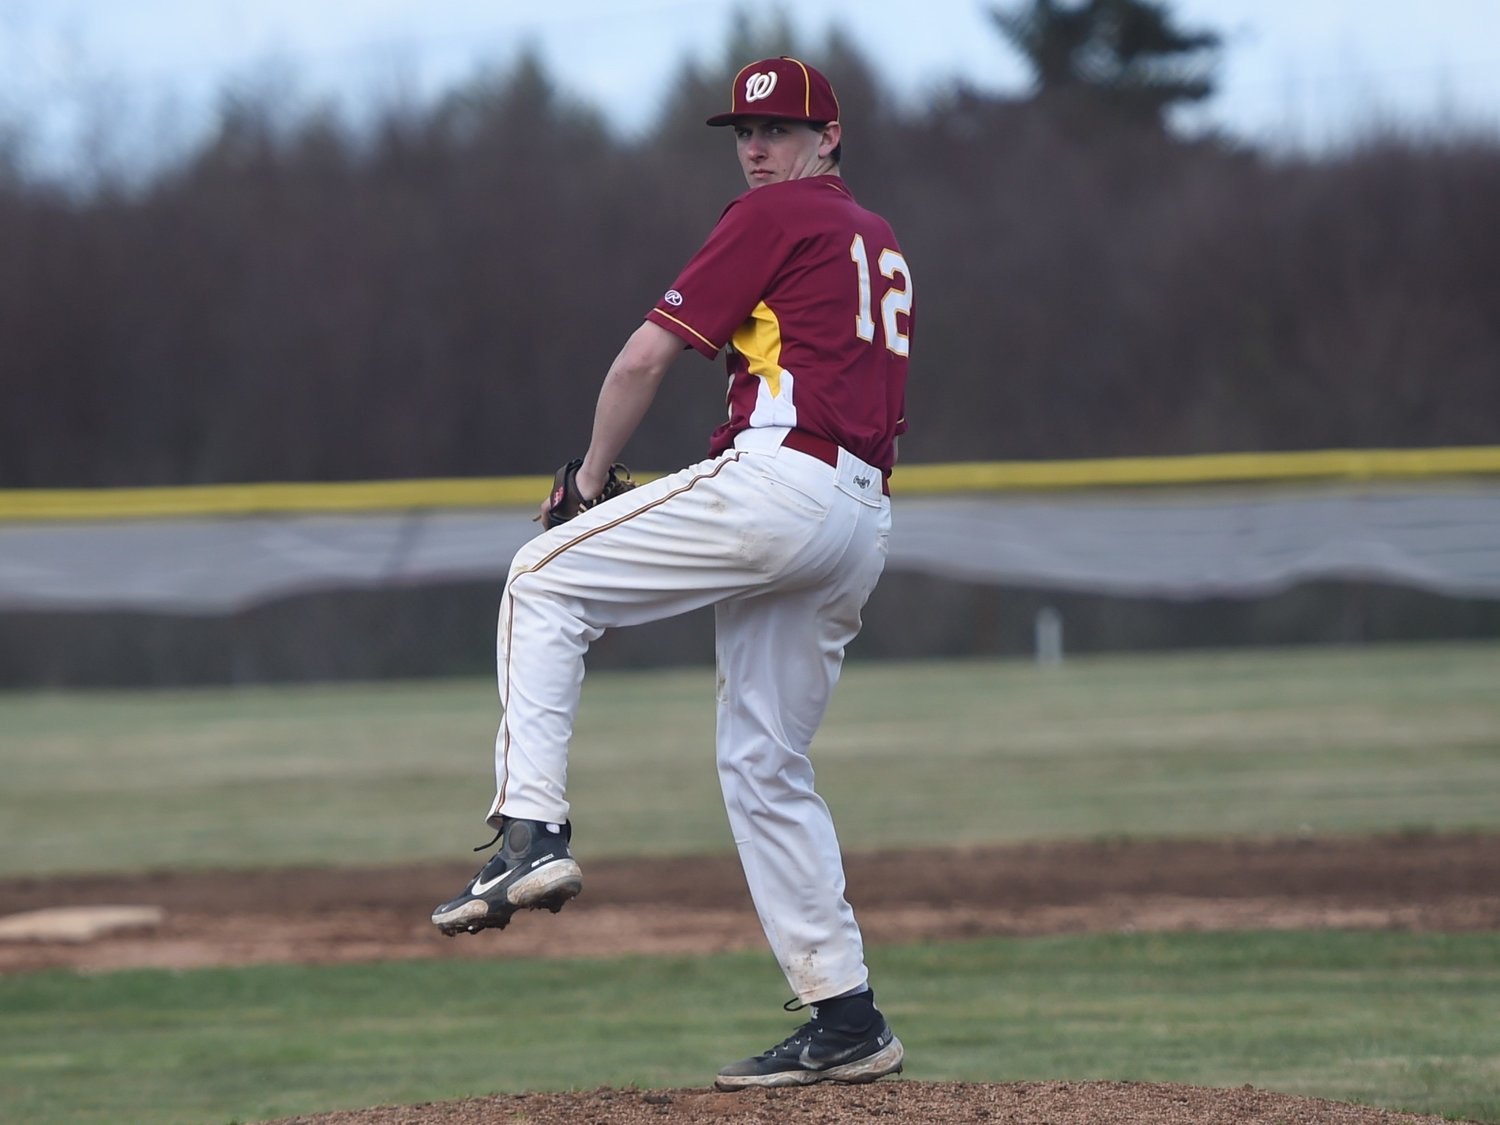 Winlock's Aiden Freitas winds up to deliver a pitch to an Ilwaco batter on Saturday, April 10, 2021.